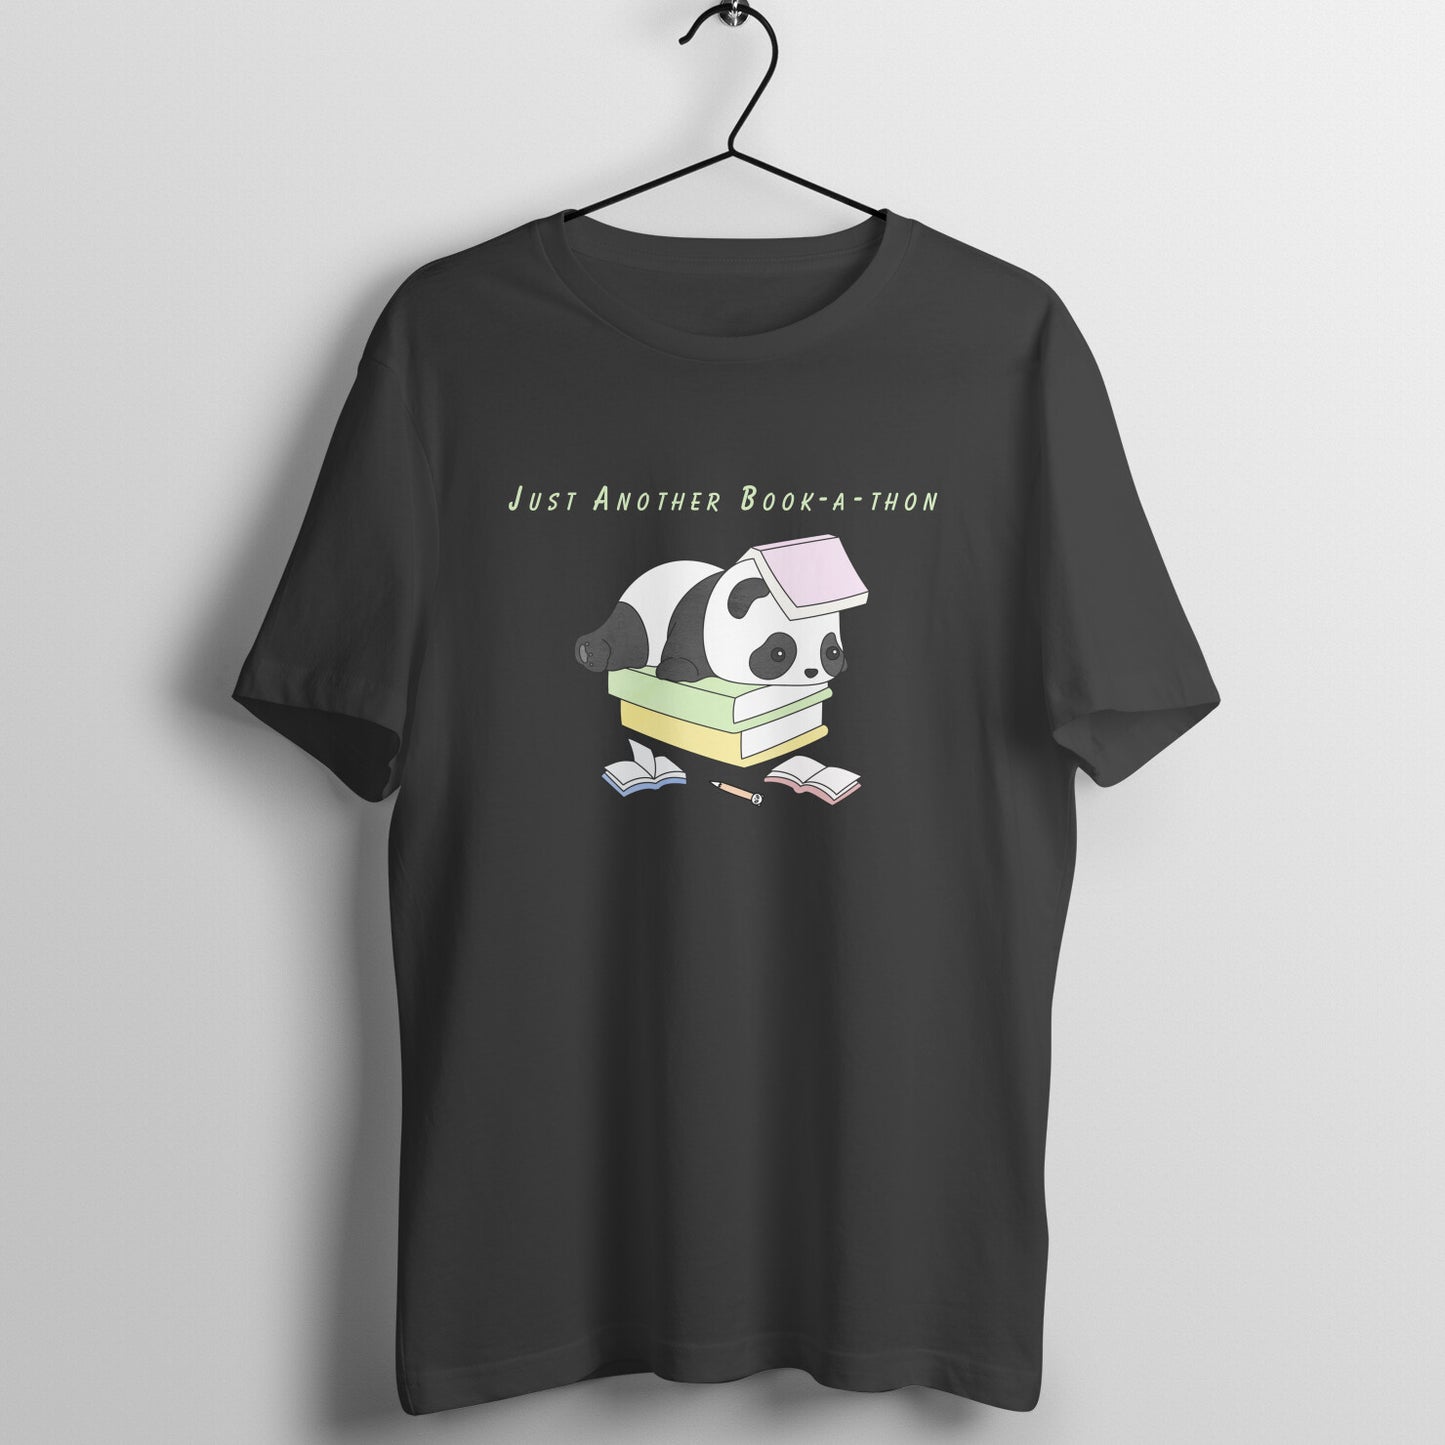 Just Another Book-a-thon Book Lovers Tshirt